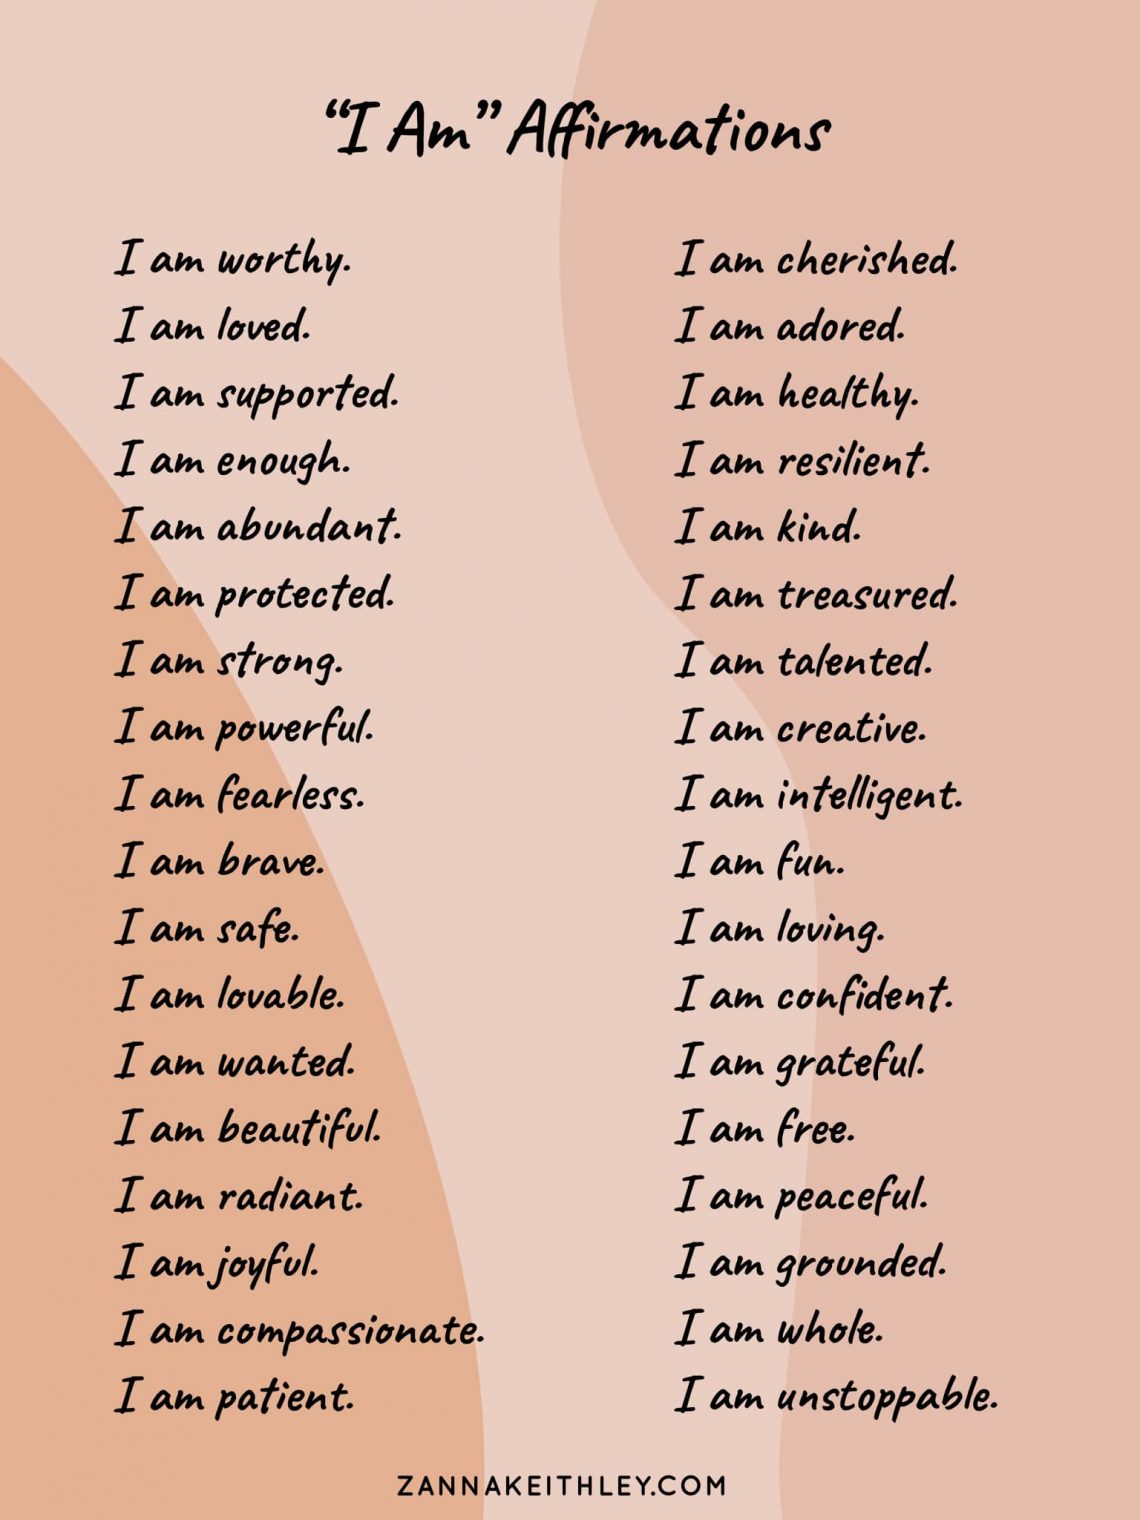 How To Use Affirmations (So They Actually Work) - Zanna Keithley